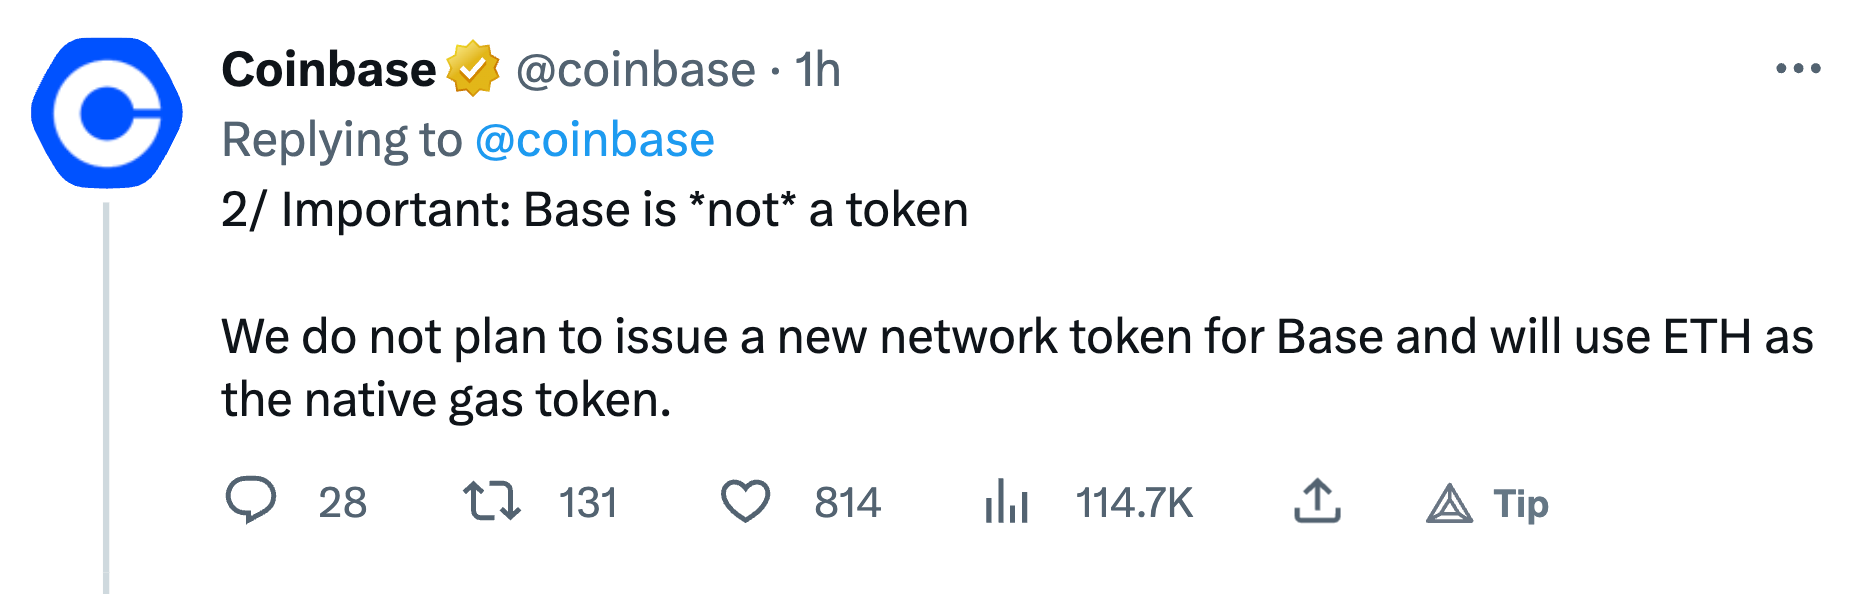 Coinbase Launches Ethereum Layer 2 Network (BASE Token?)